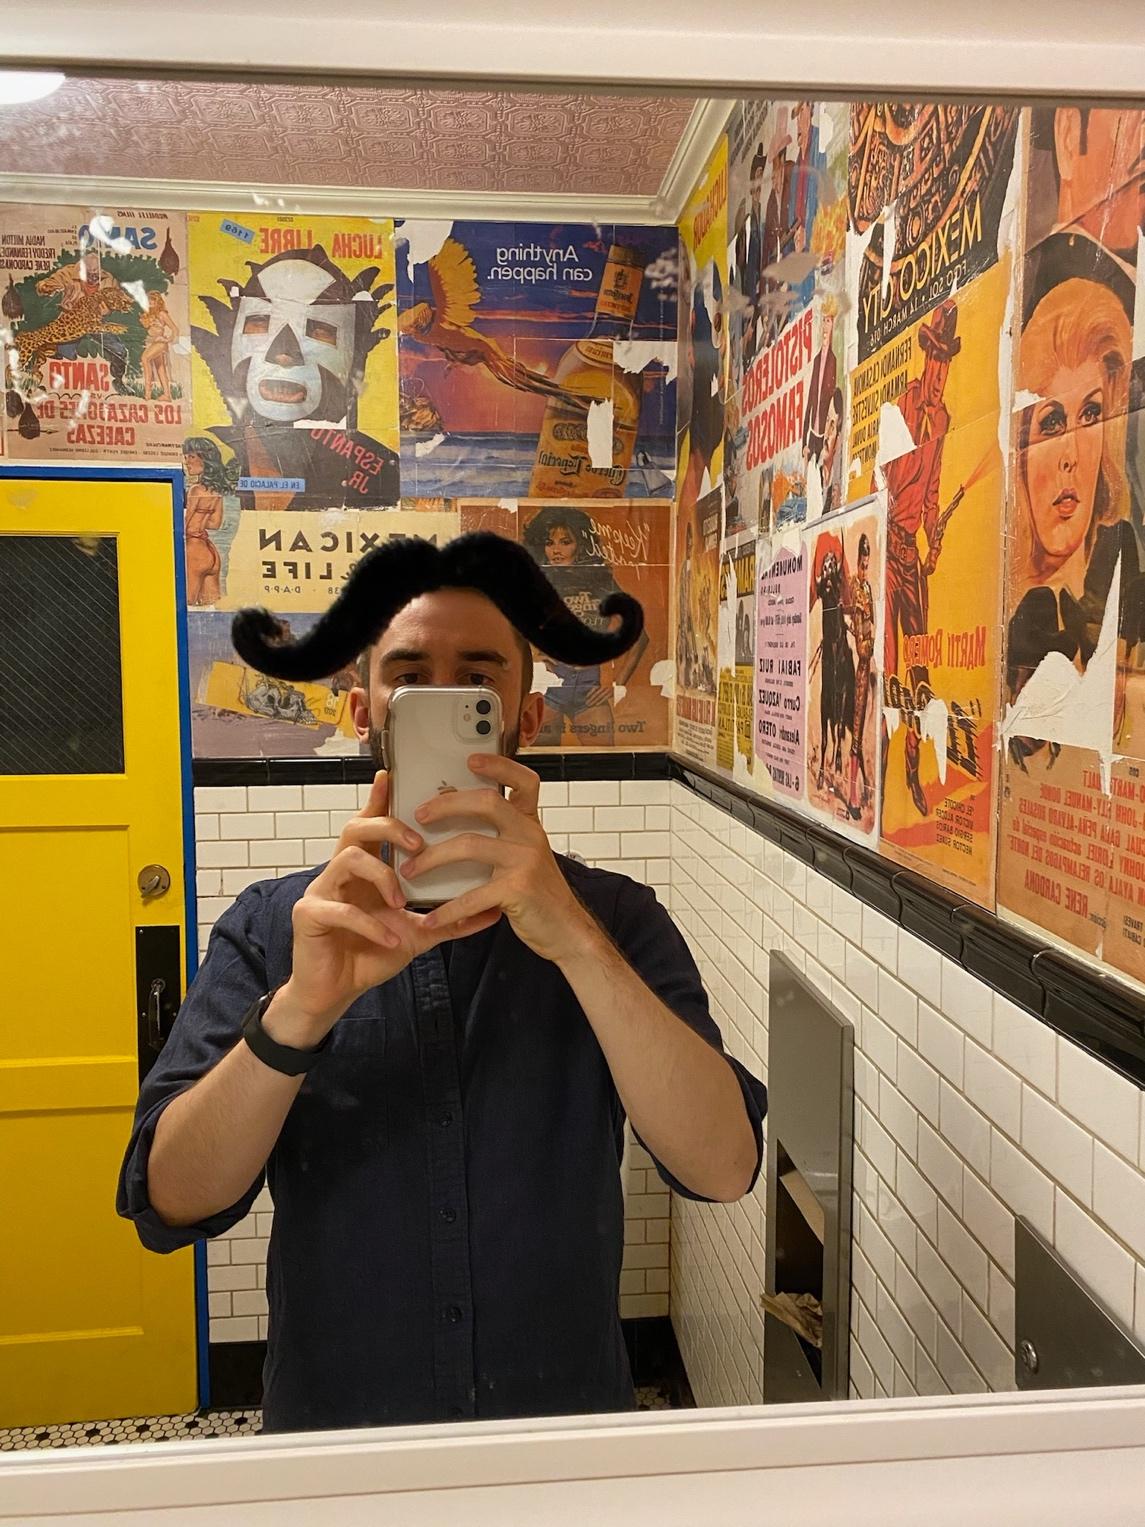 Stephan poses for a bathroom mirror selfie. A faux mustache stuck to the mirror is positioned so it looks like a floppy hairstyle on top of Stephan's head.